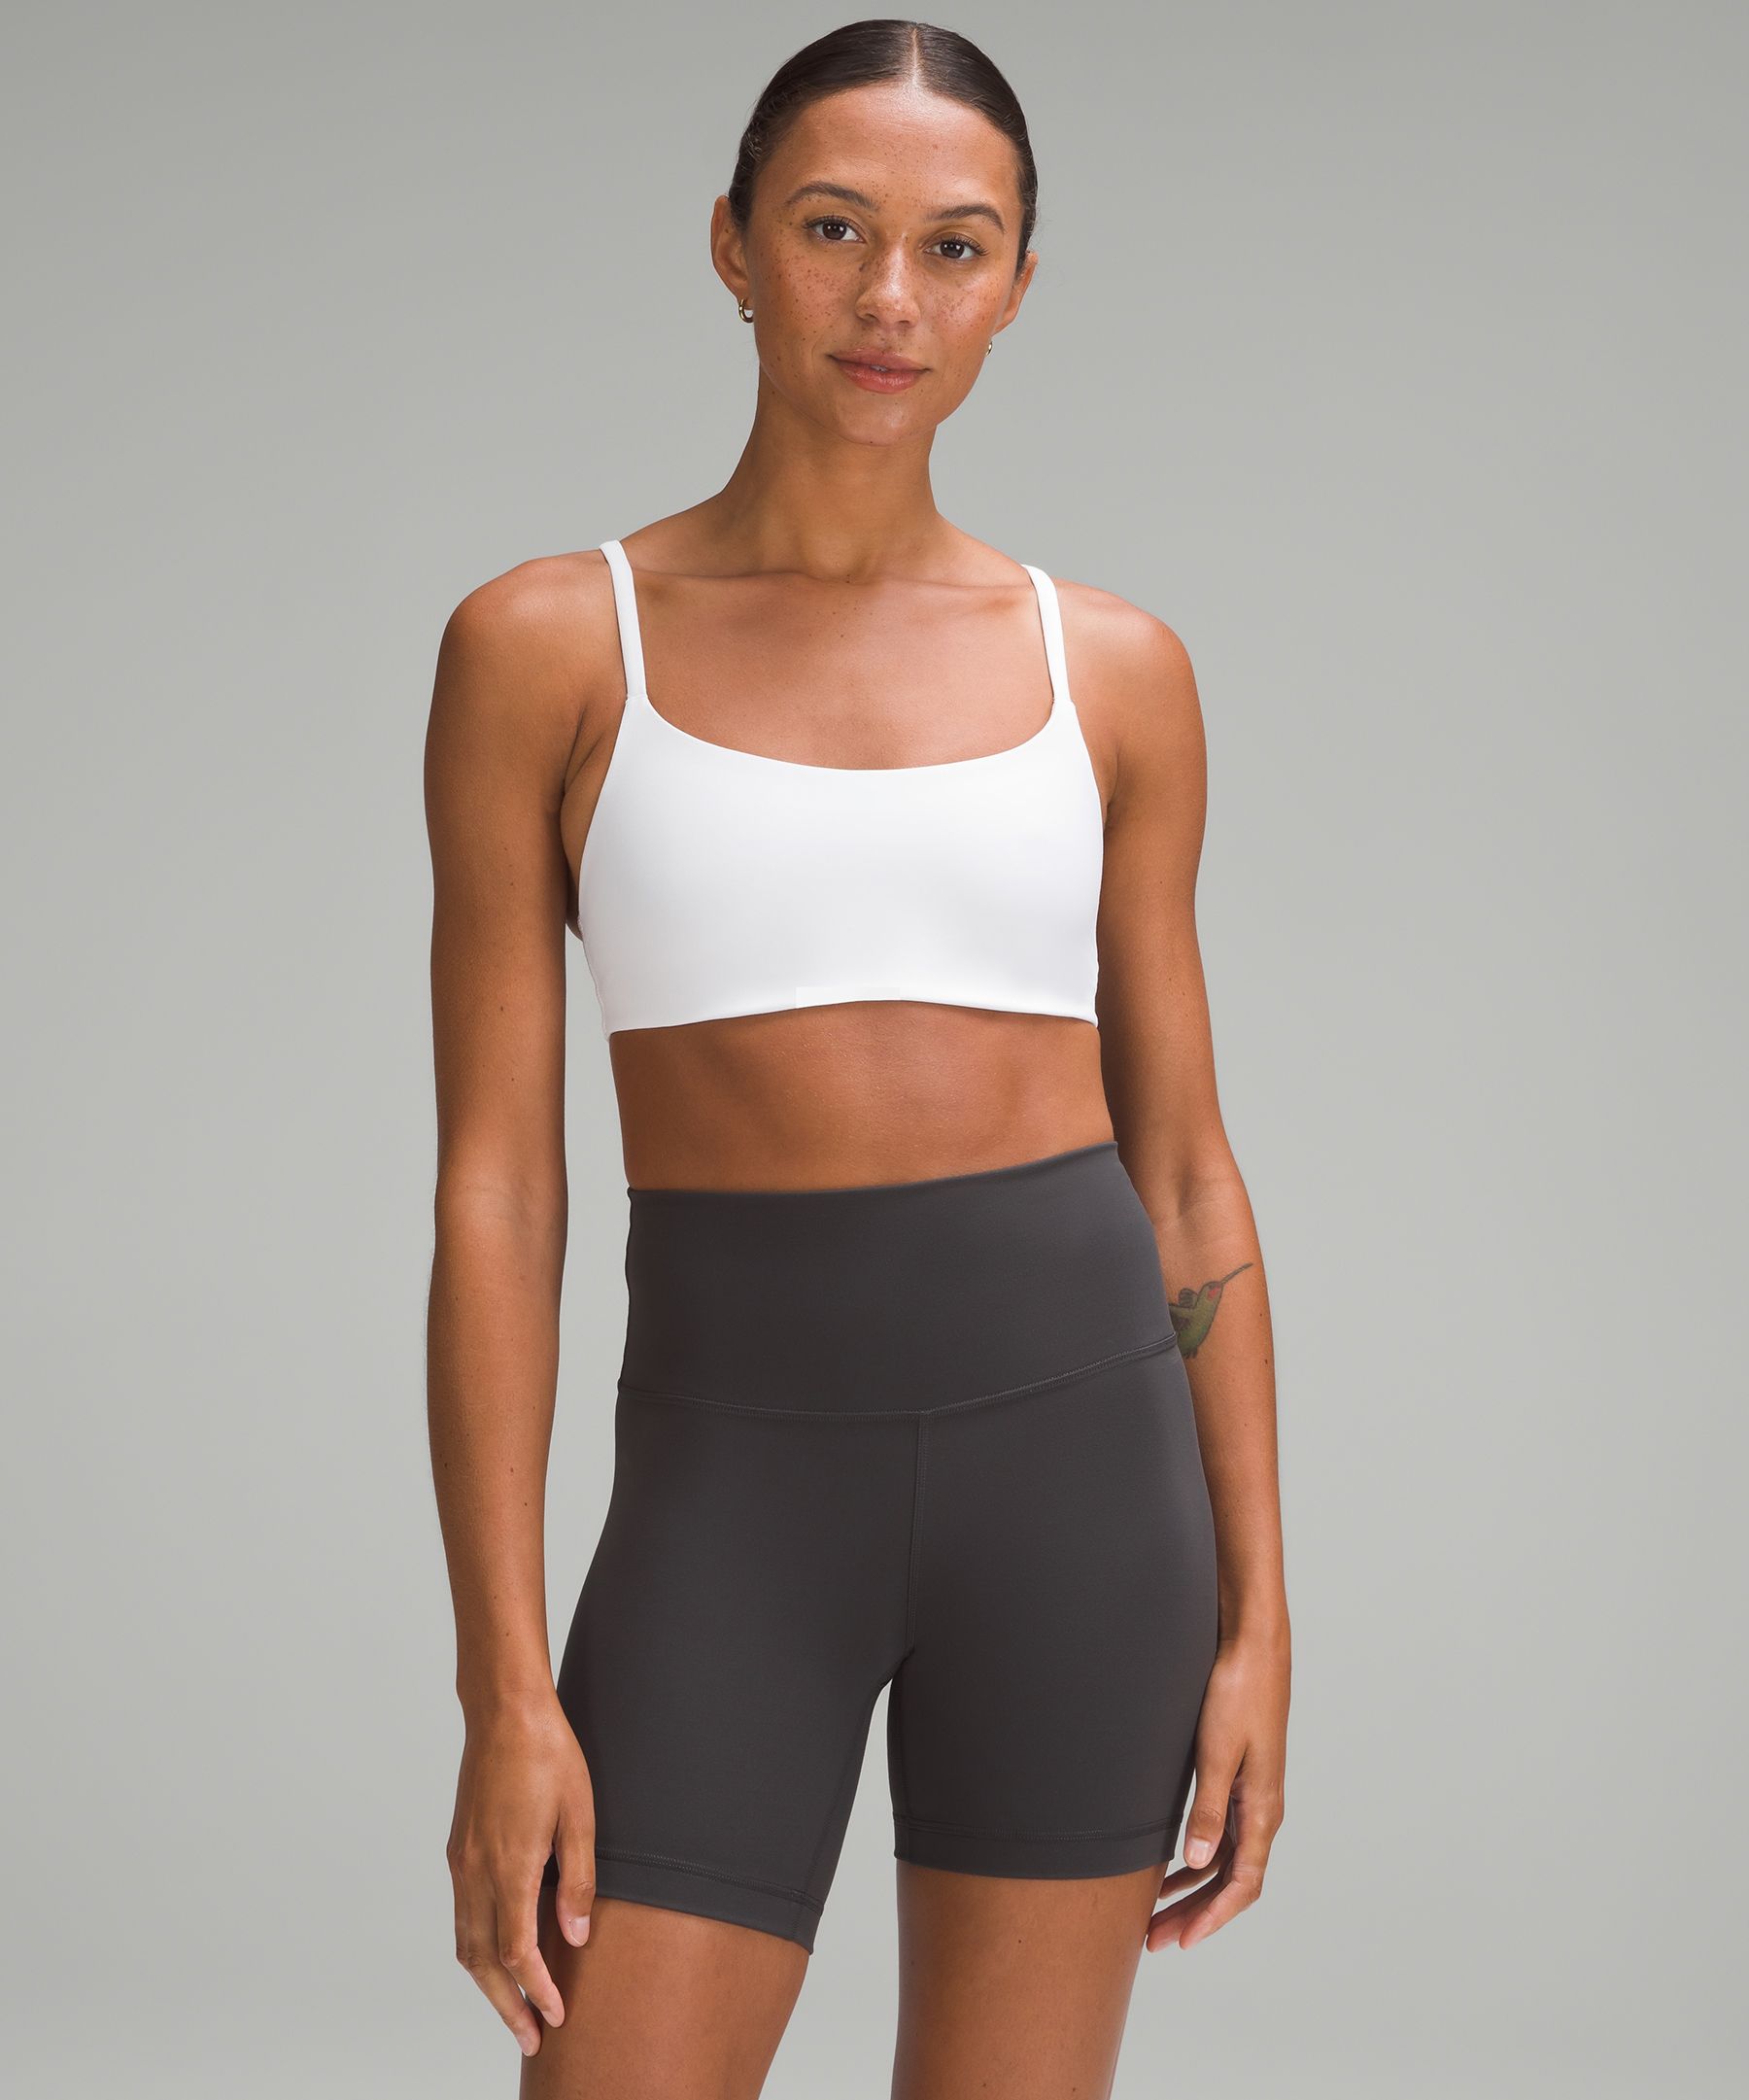 Lululemon Wunder Train Strappy Racer Bra Light Support, A/b Cup